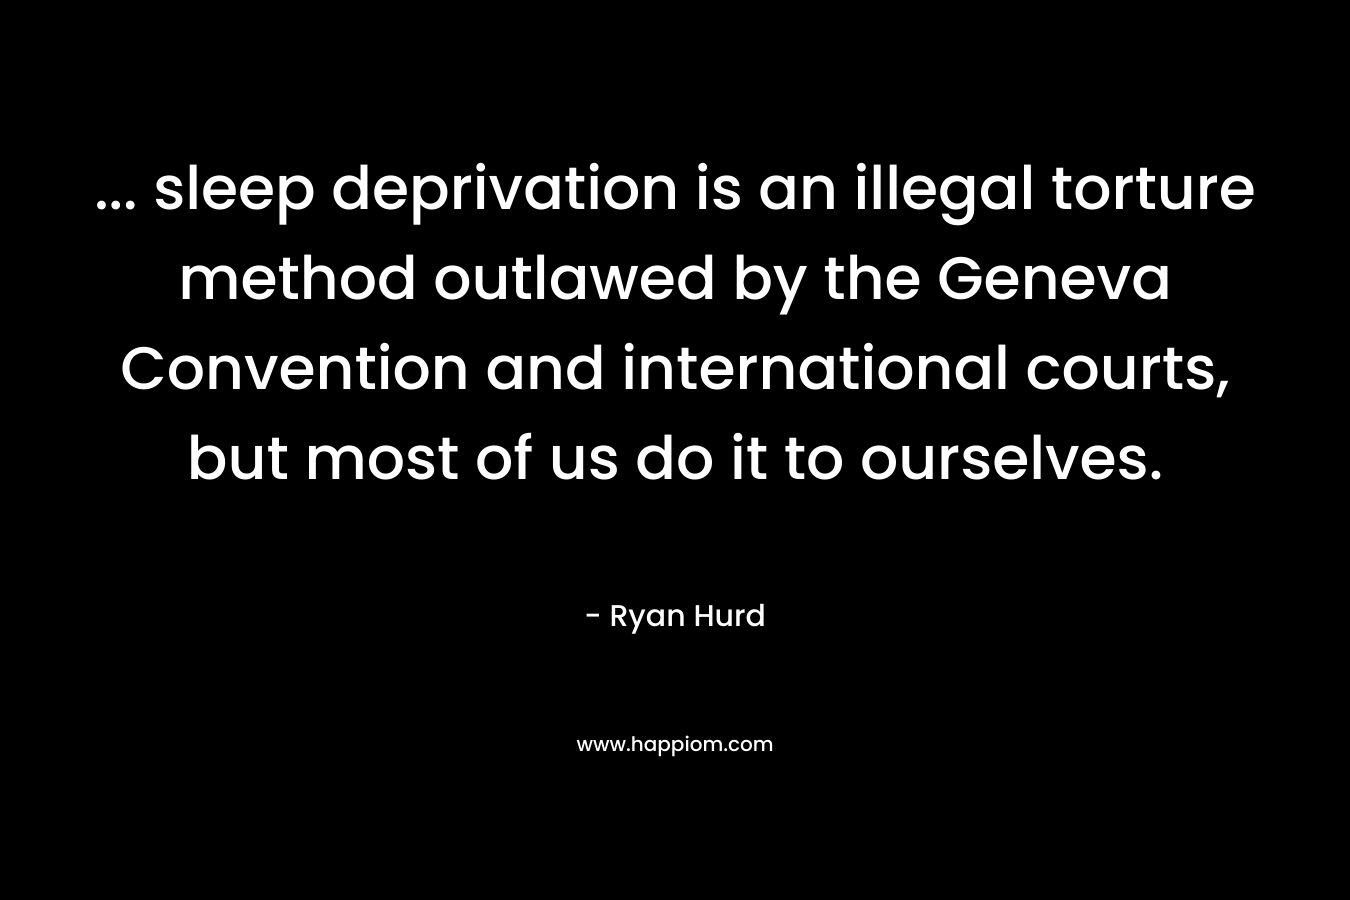 ... sleep deprivation is an illegal torture method outlawed by the Geneva Convention and international courts, but most of us do it to ourselves.